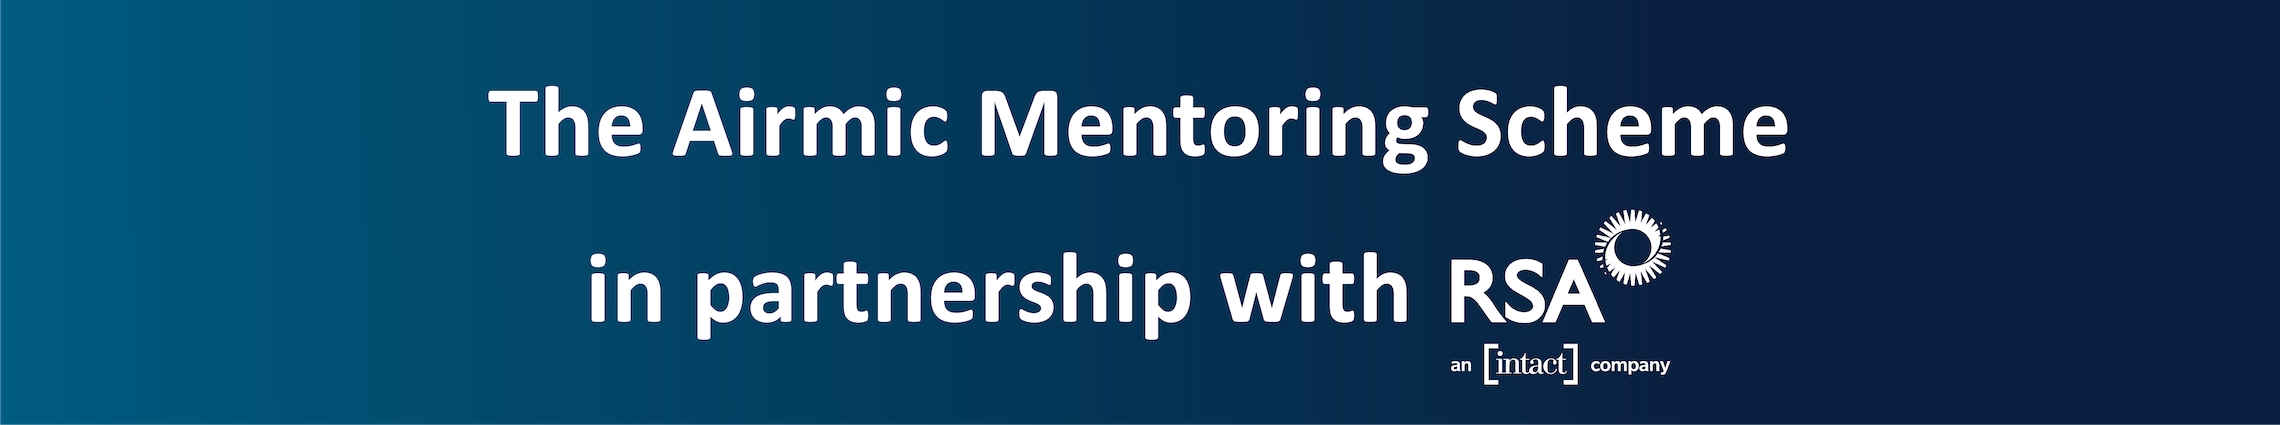 The Airmic Mentoring Scheme offers members the opportunity to learn from experienced and senior members.